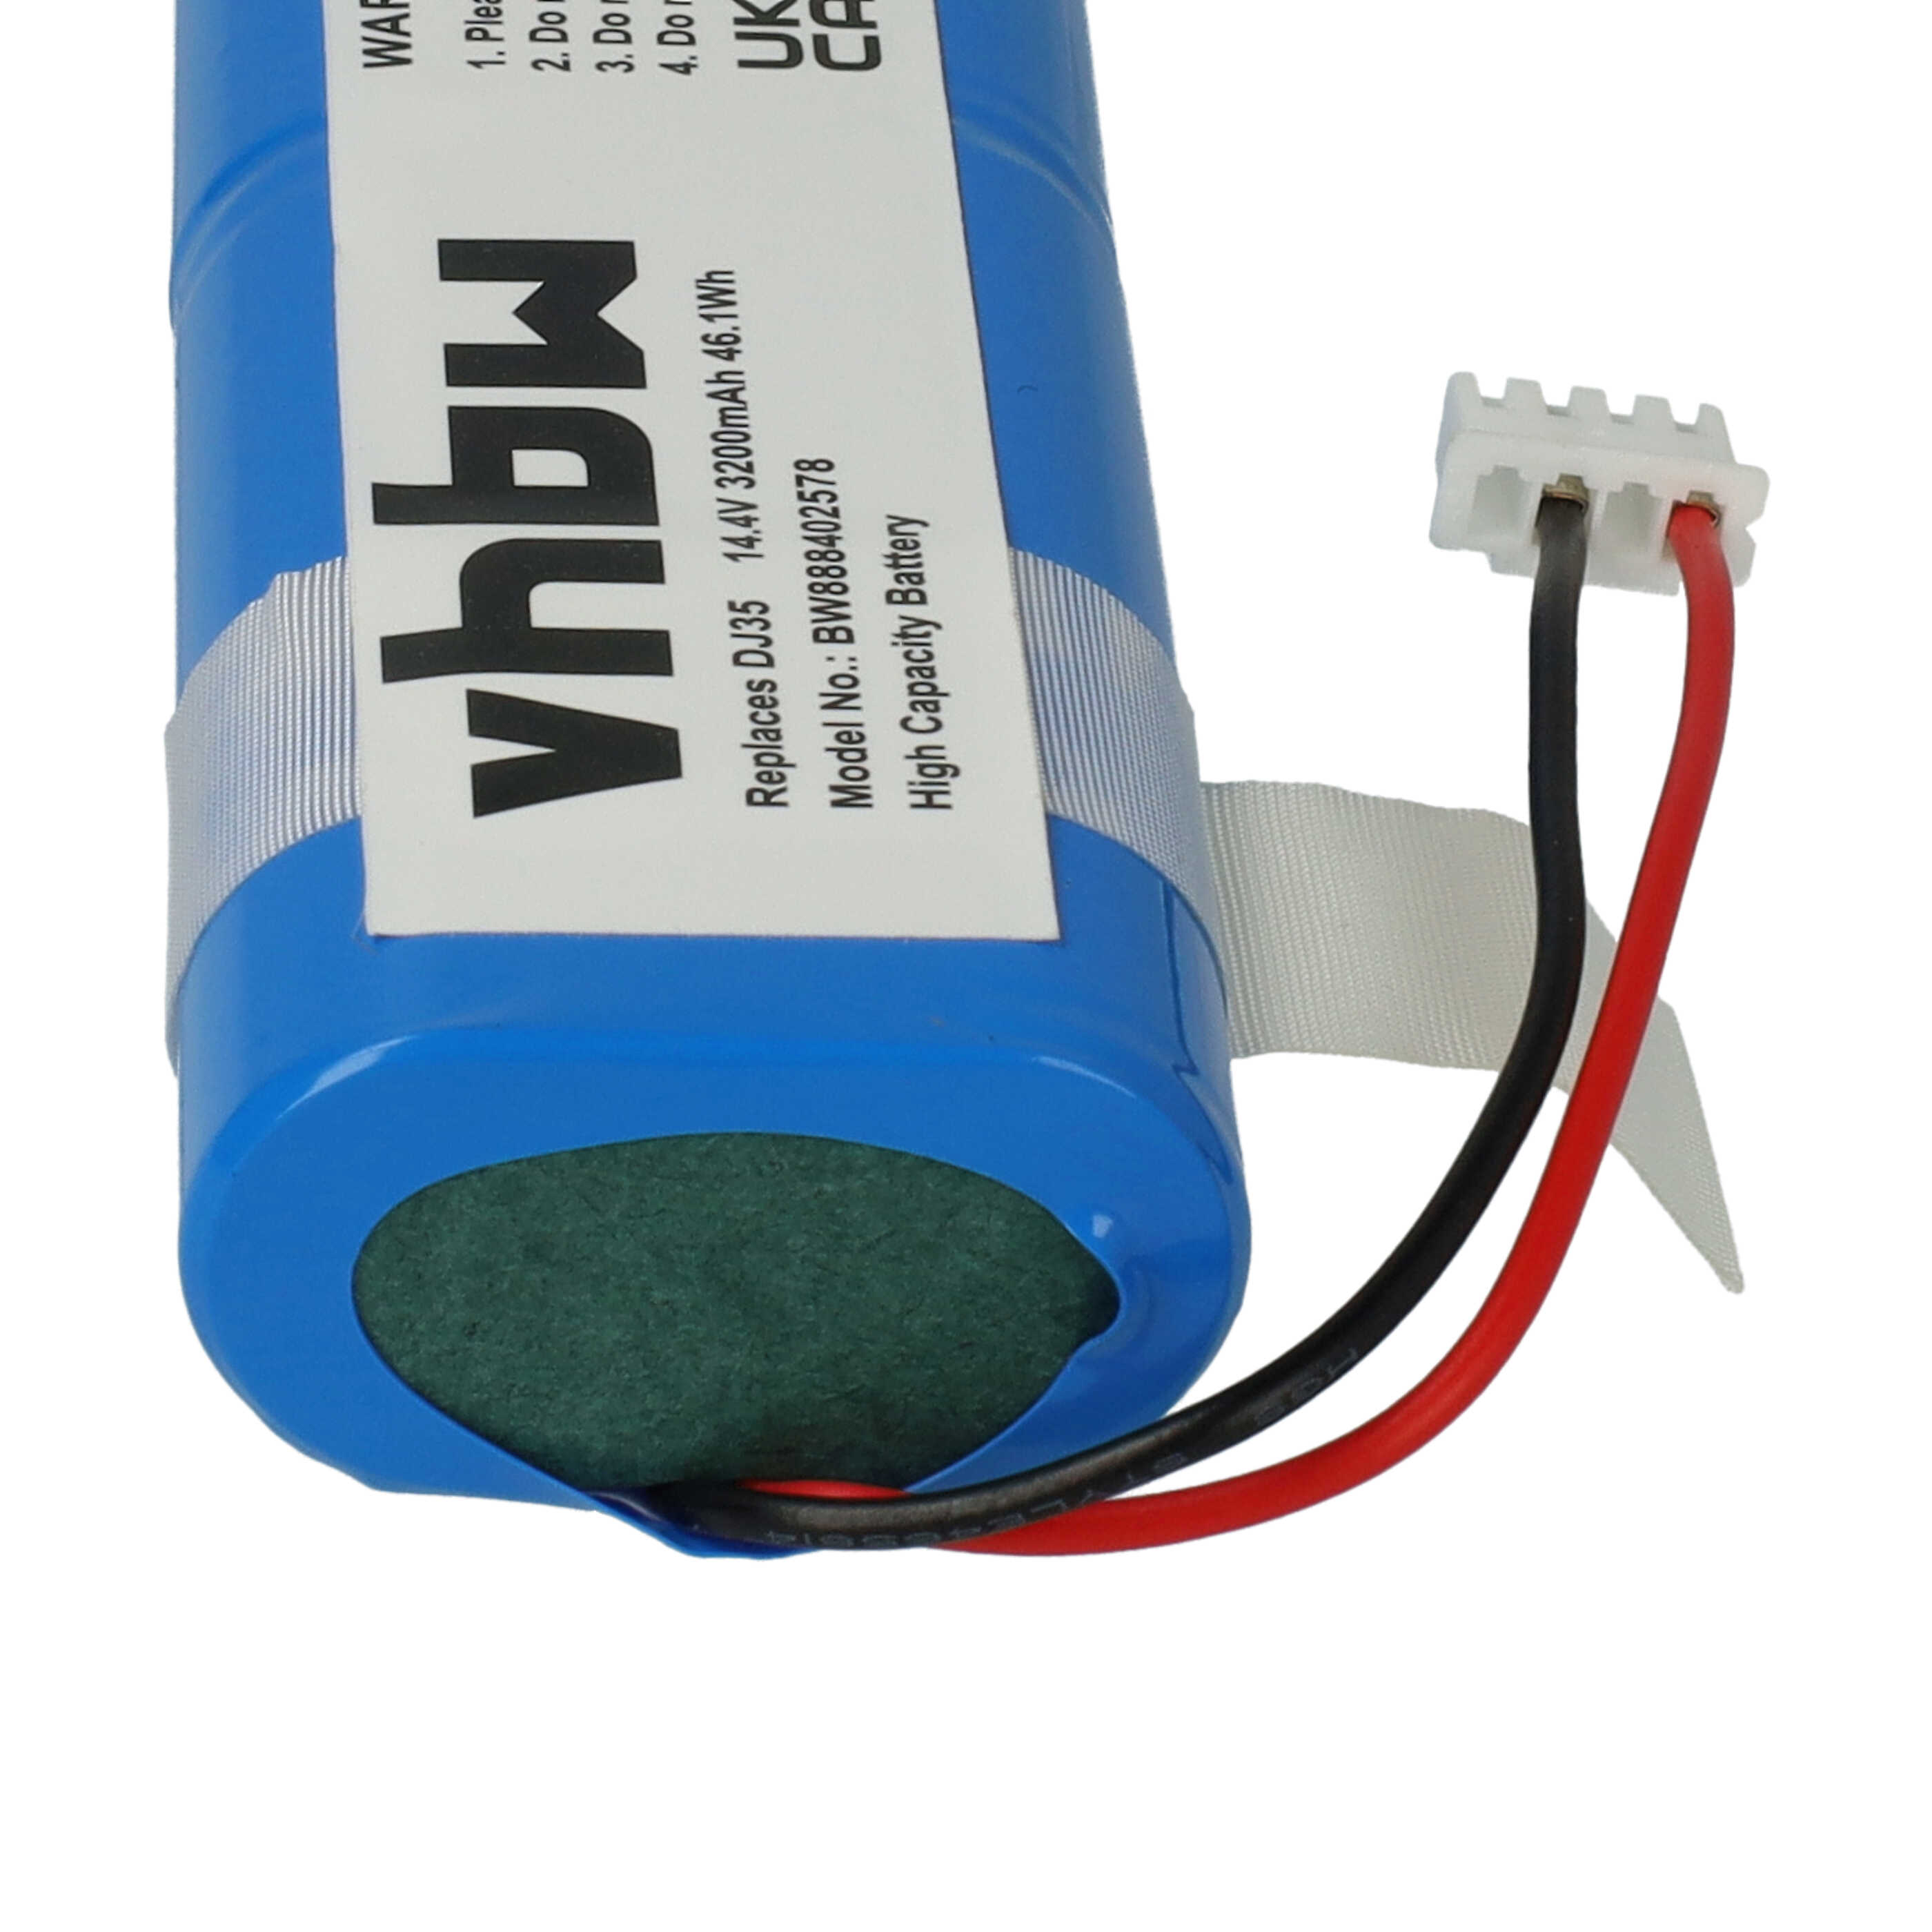 Battery Replacement for Ecovacs S08-LI-144-2500 for - 3200mAh, 14.4V, Li-Ion